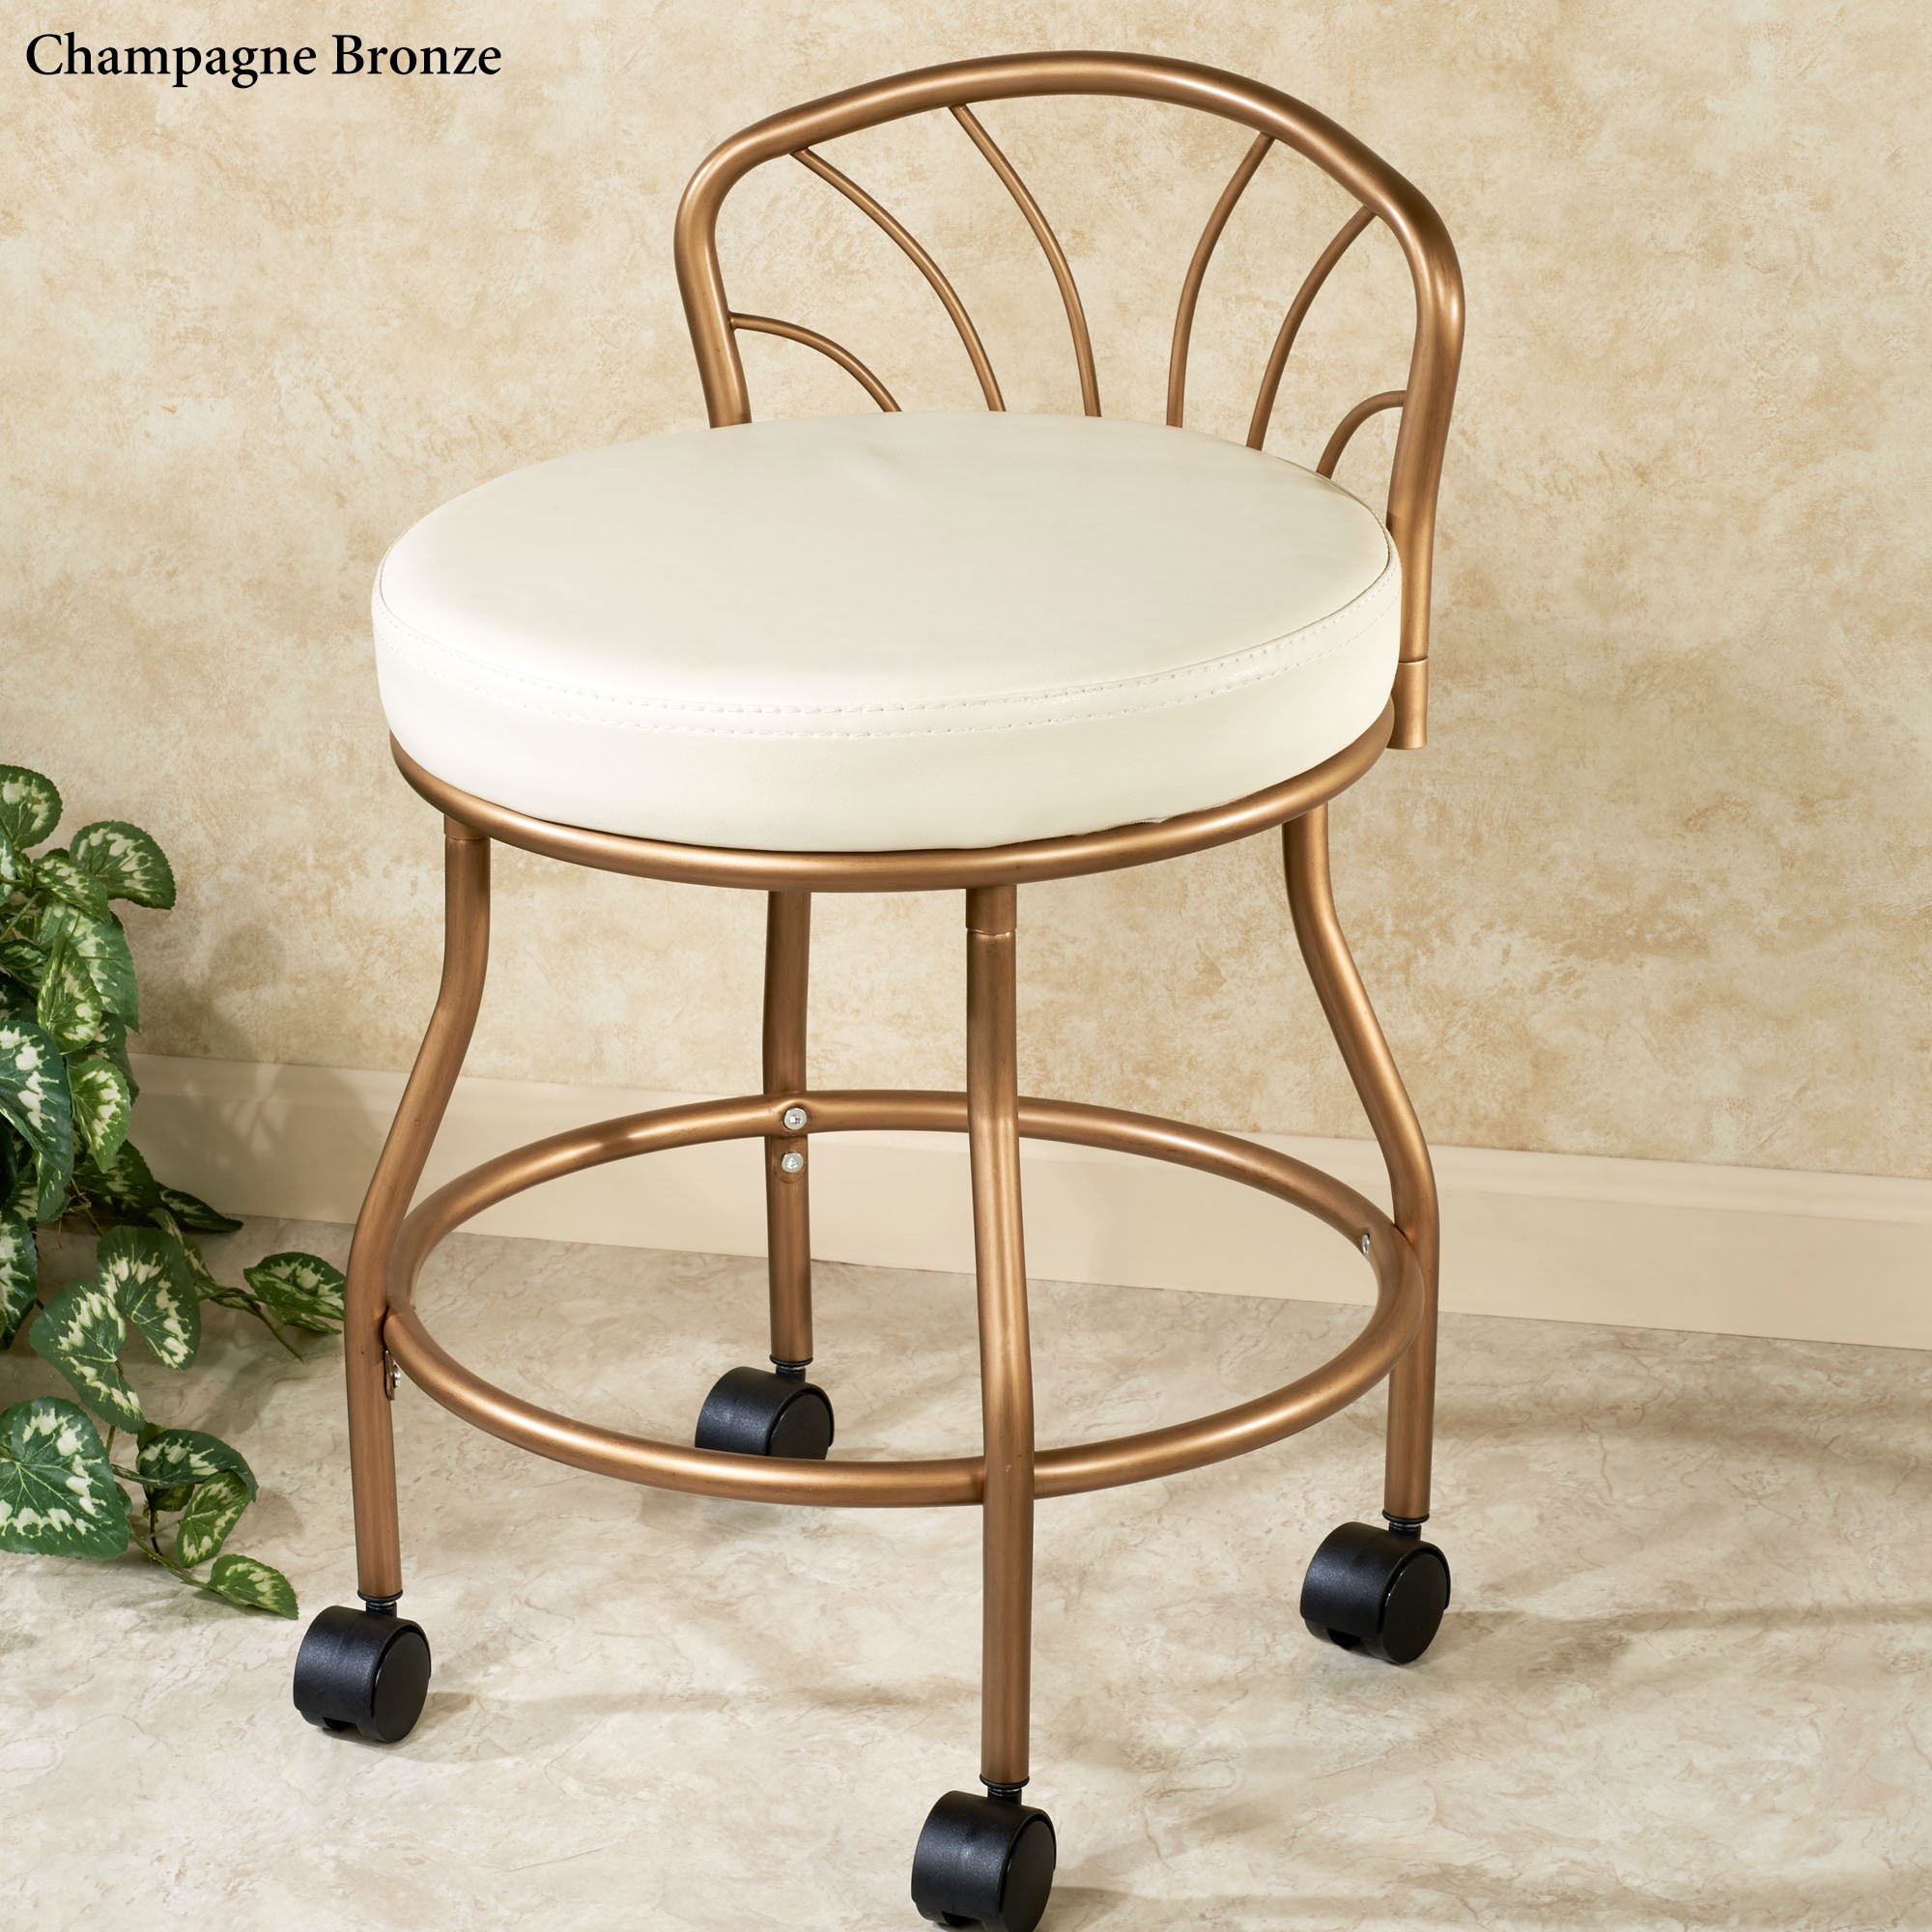 Bathroom Vanity Chair
 Flare Back Metallic Finish Vanity Chair with Casters